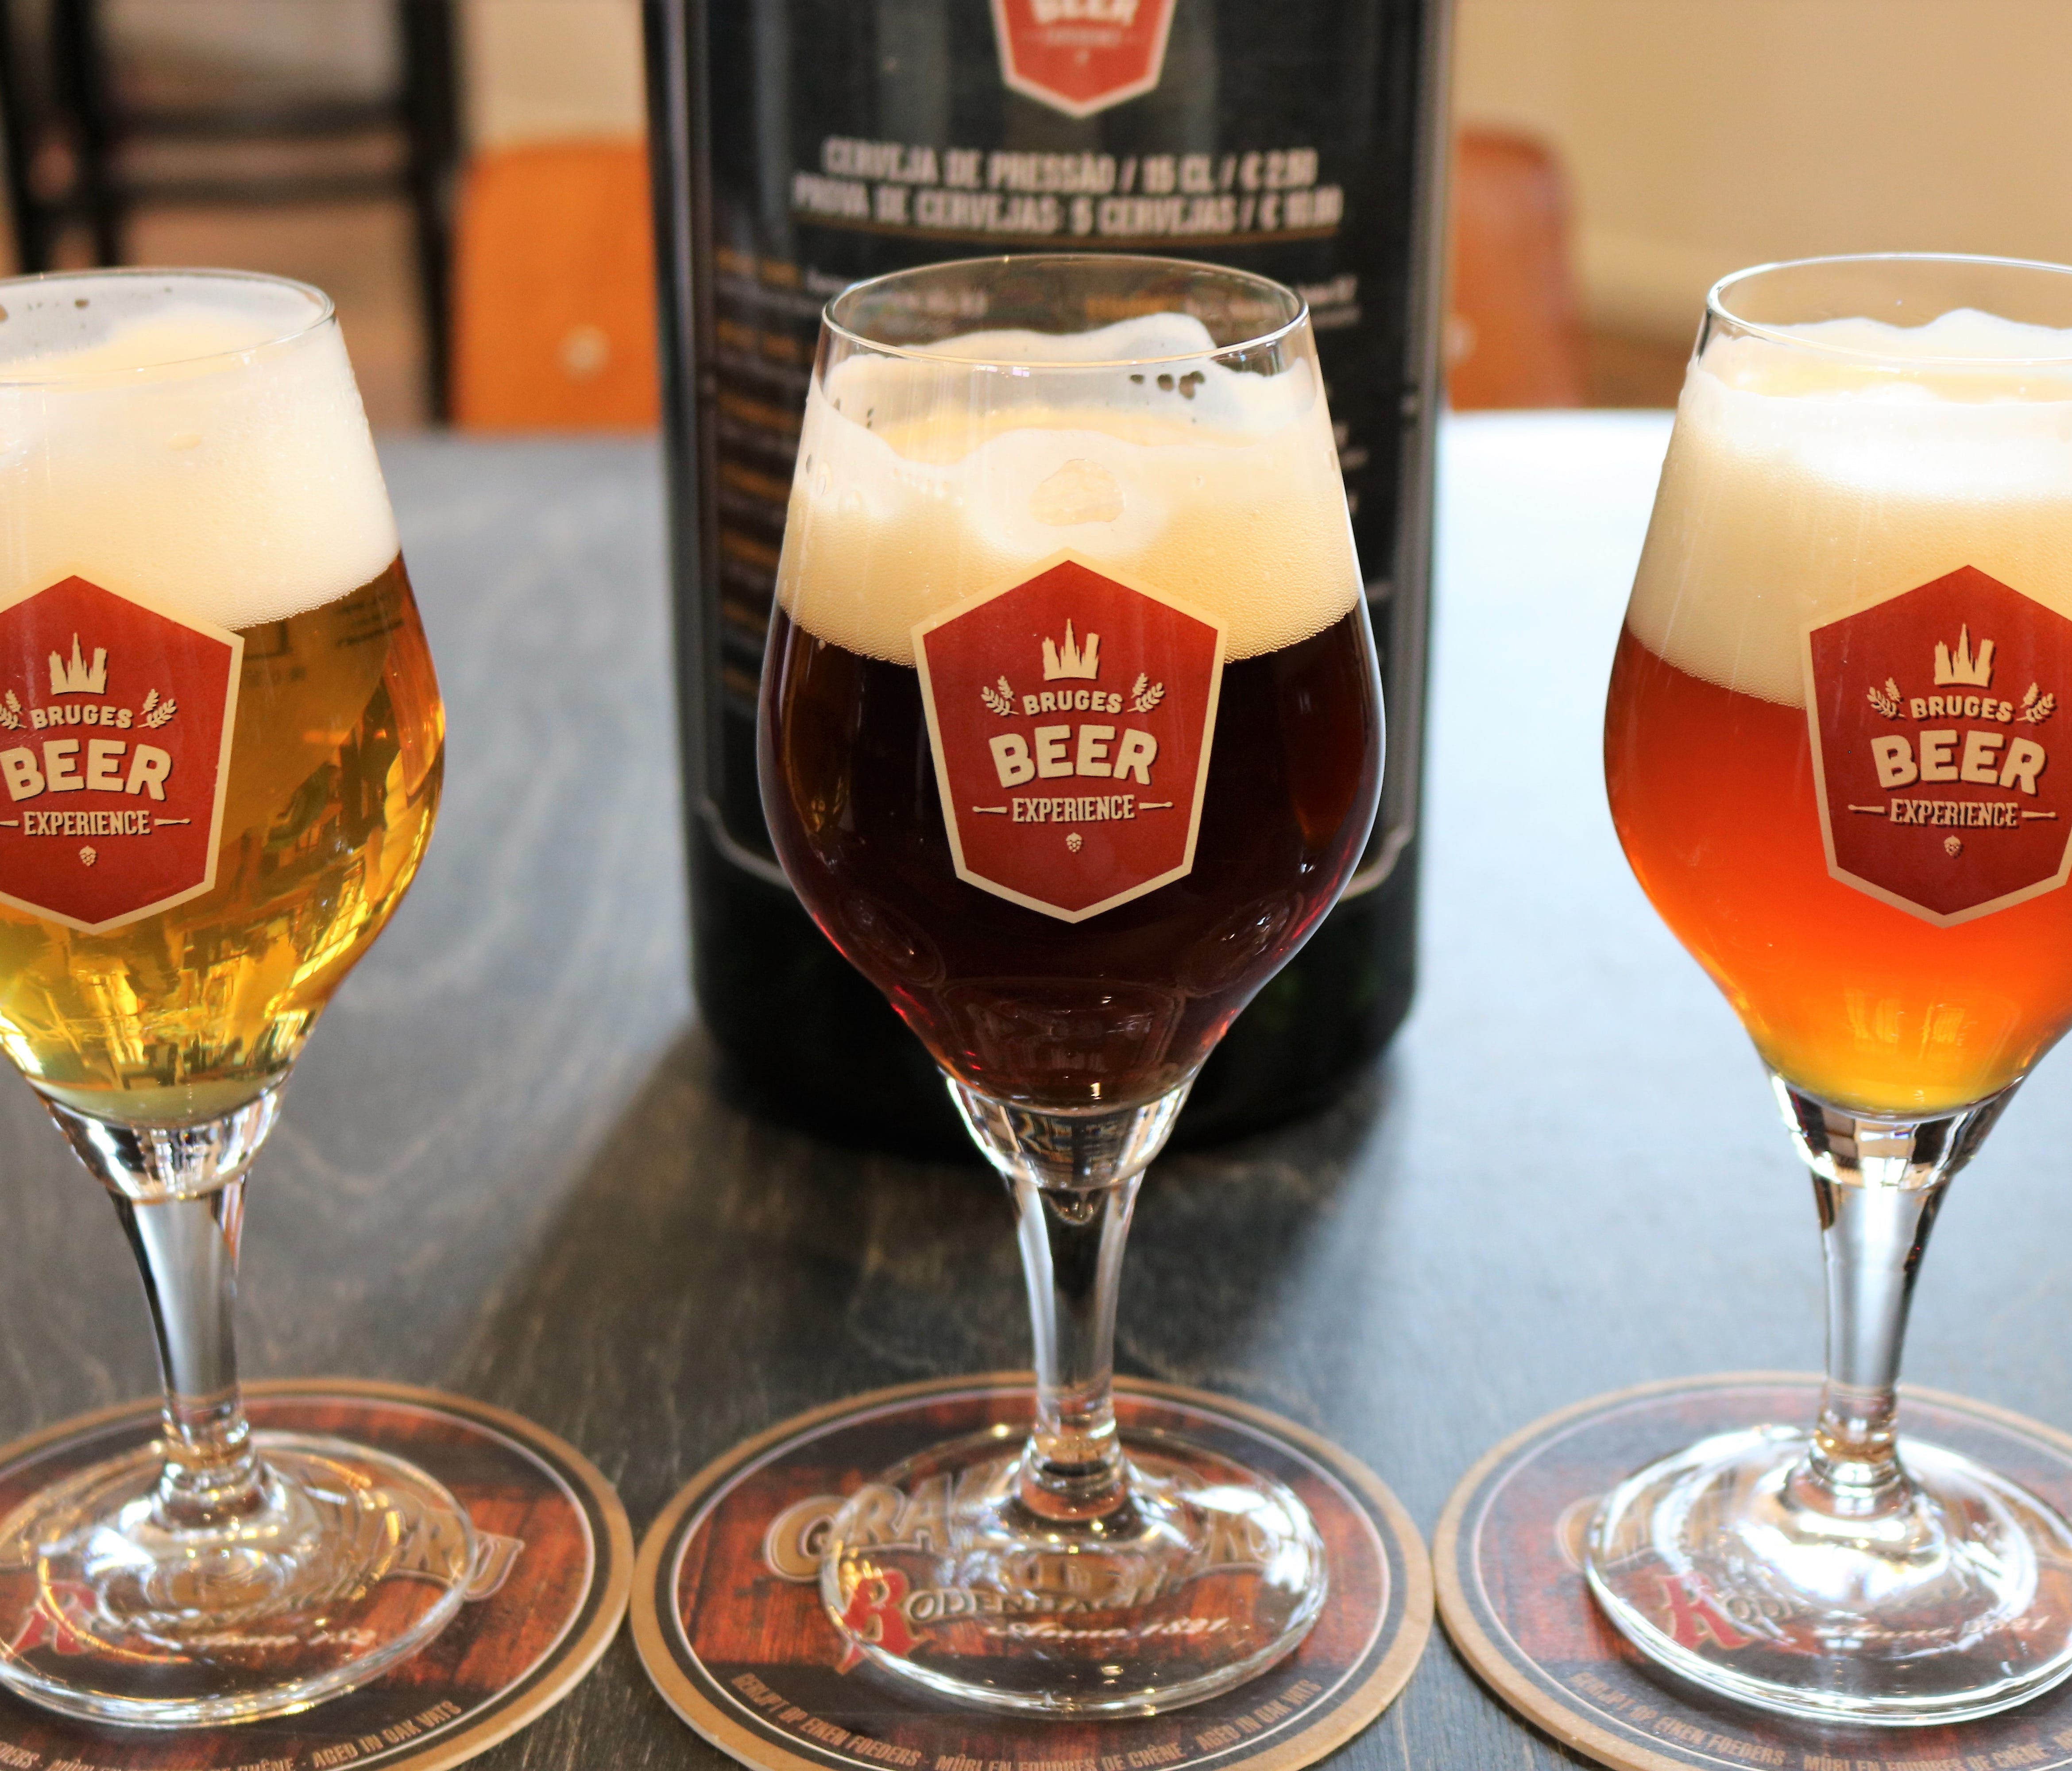 Tickets optionally include a flight of three beers, from a selection of a dozen on draft. The beers offered represent a broad range of styles which the museum explores.